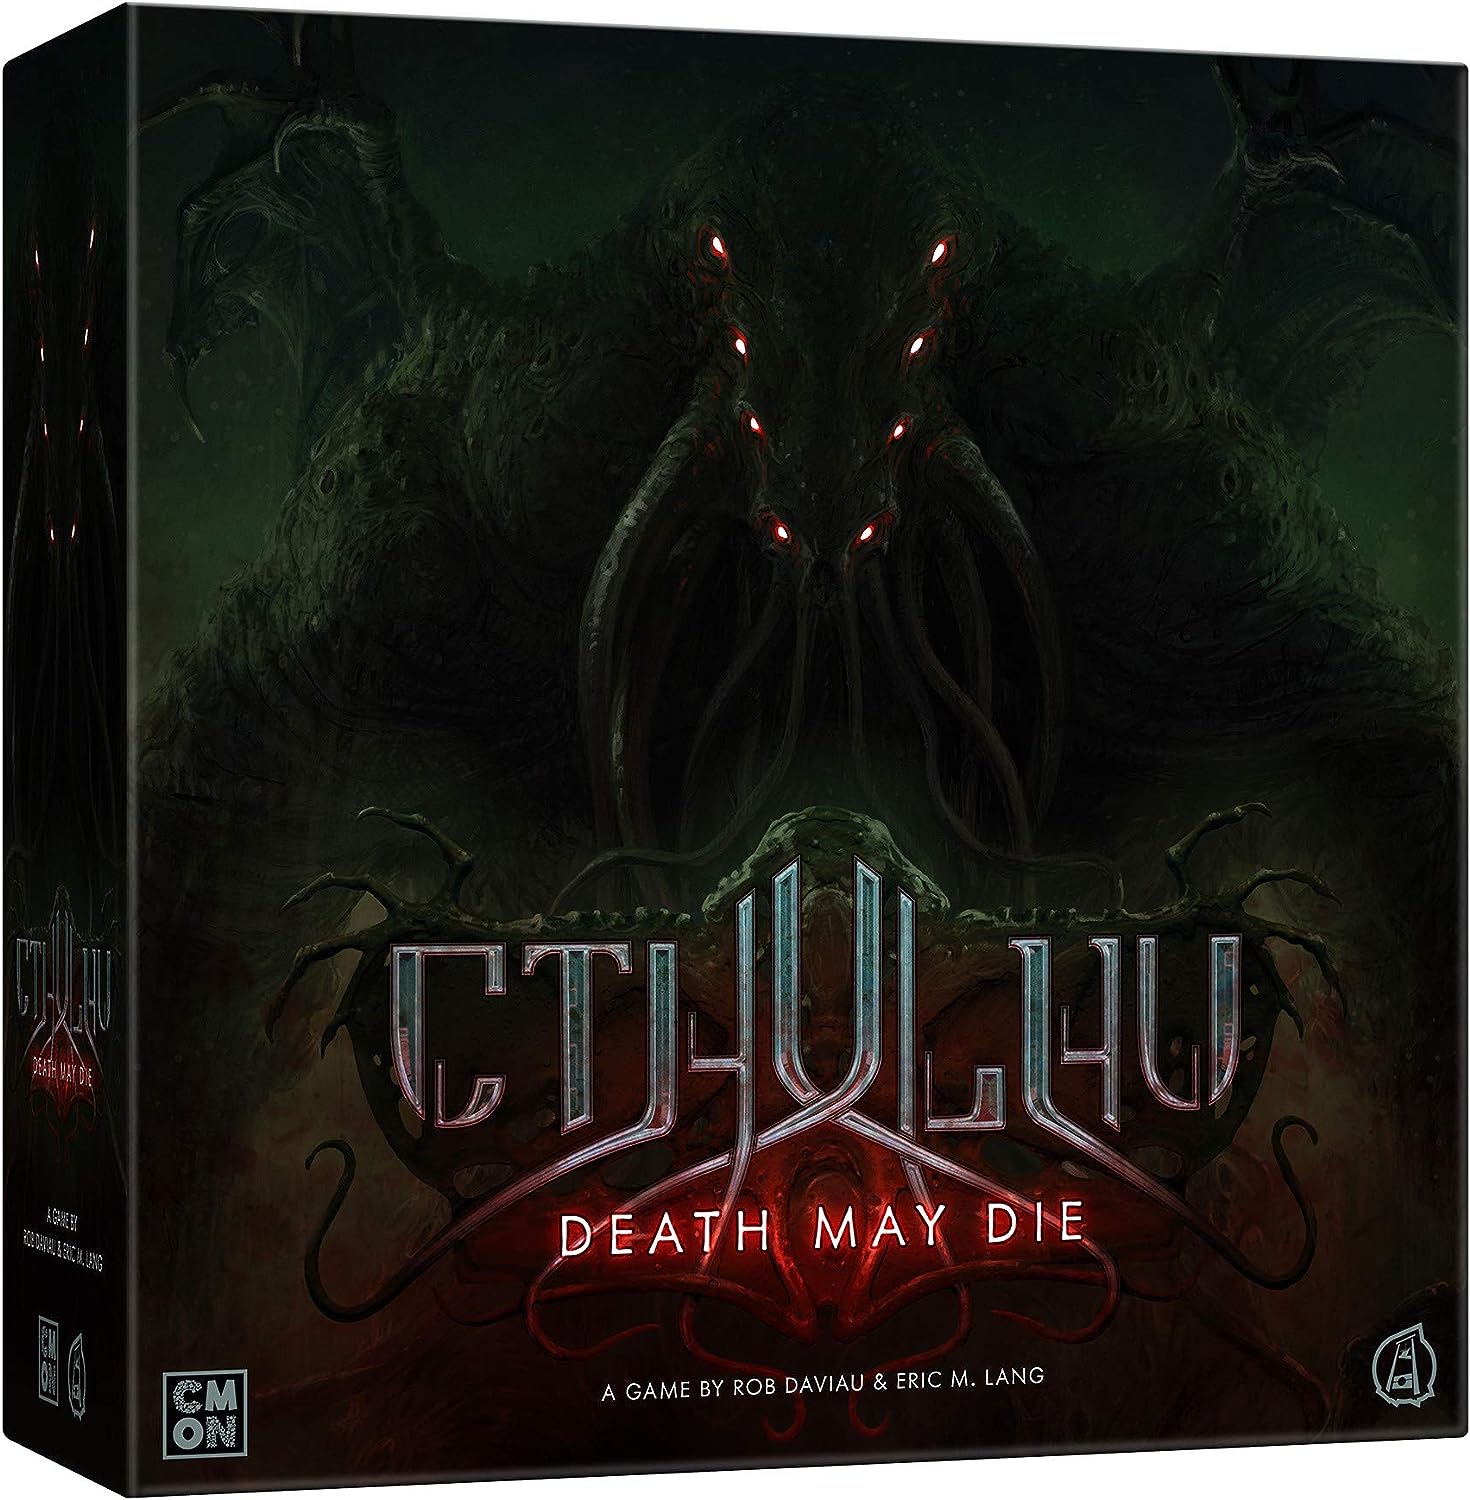 Cthulhu: Death May Die Horror / Mystery Cooperative Board Game $88 + Free Shipping